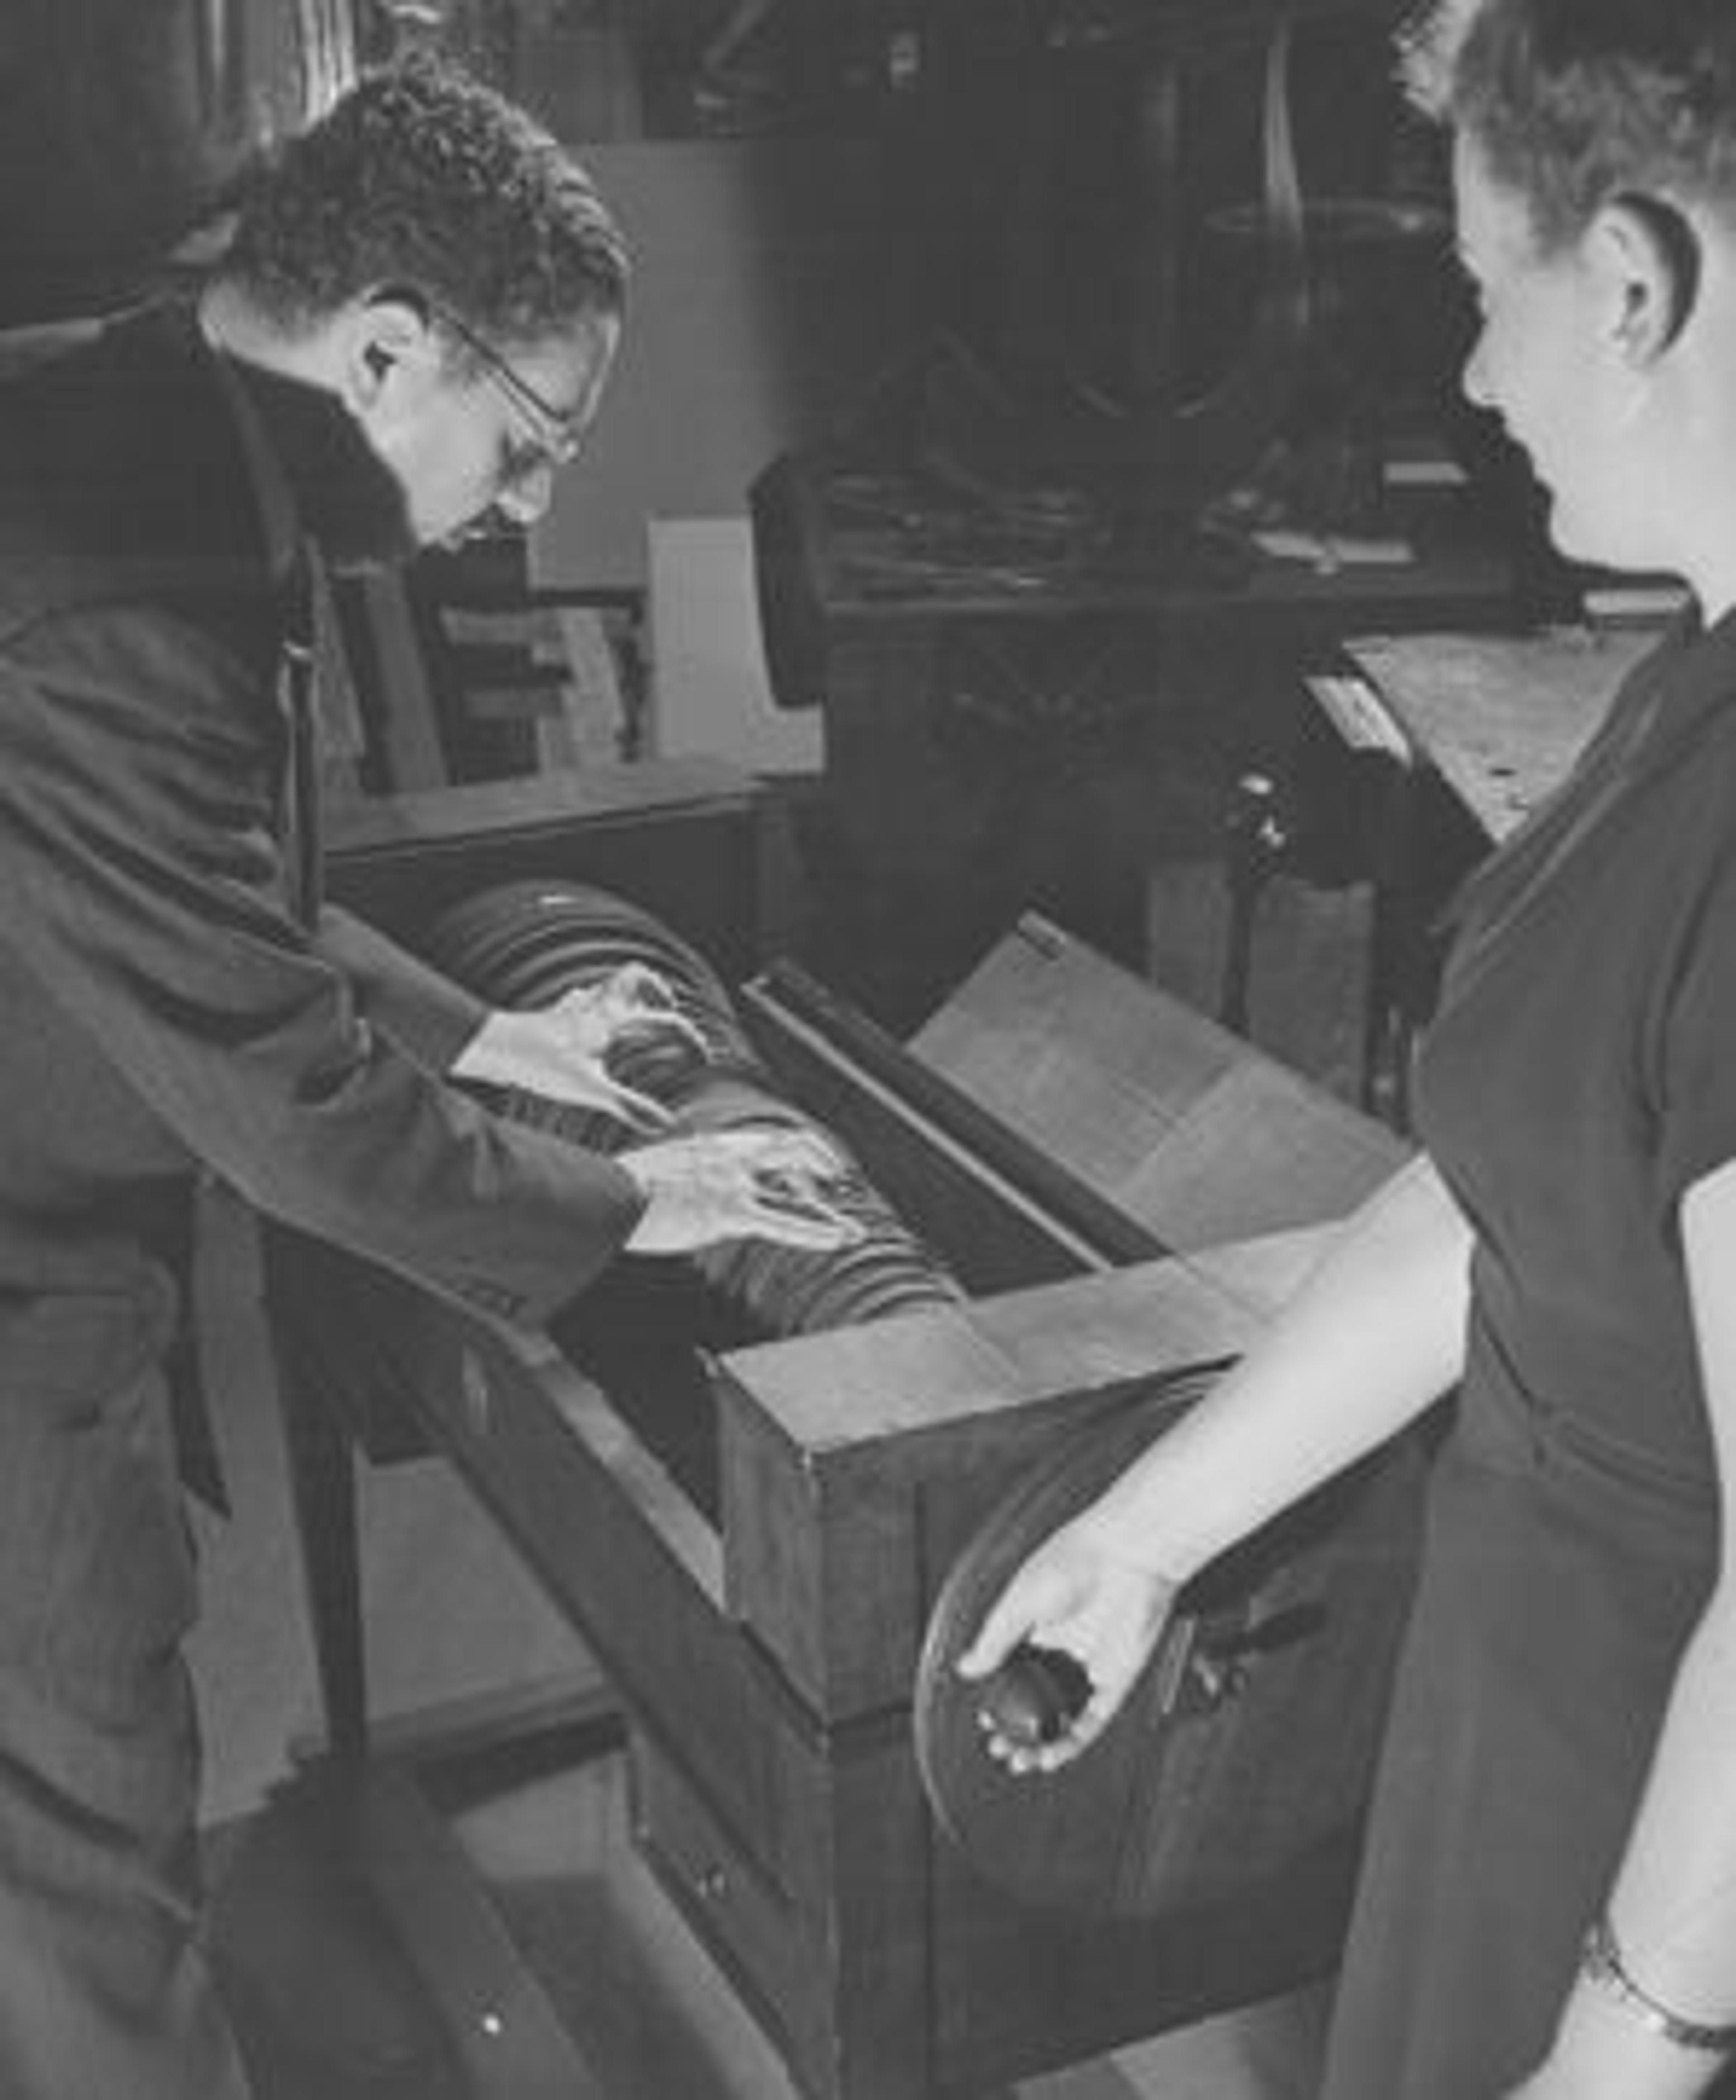 Winternitz in the long-closed instrument galleries in the early 1940s, playing a glass armonica.  Departmental Assistant Sofula Novikova is seen turning the cylinder.